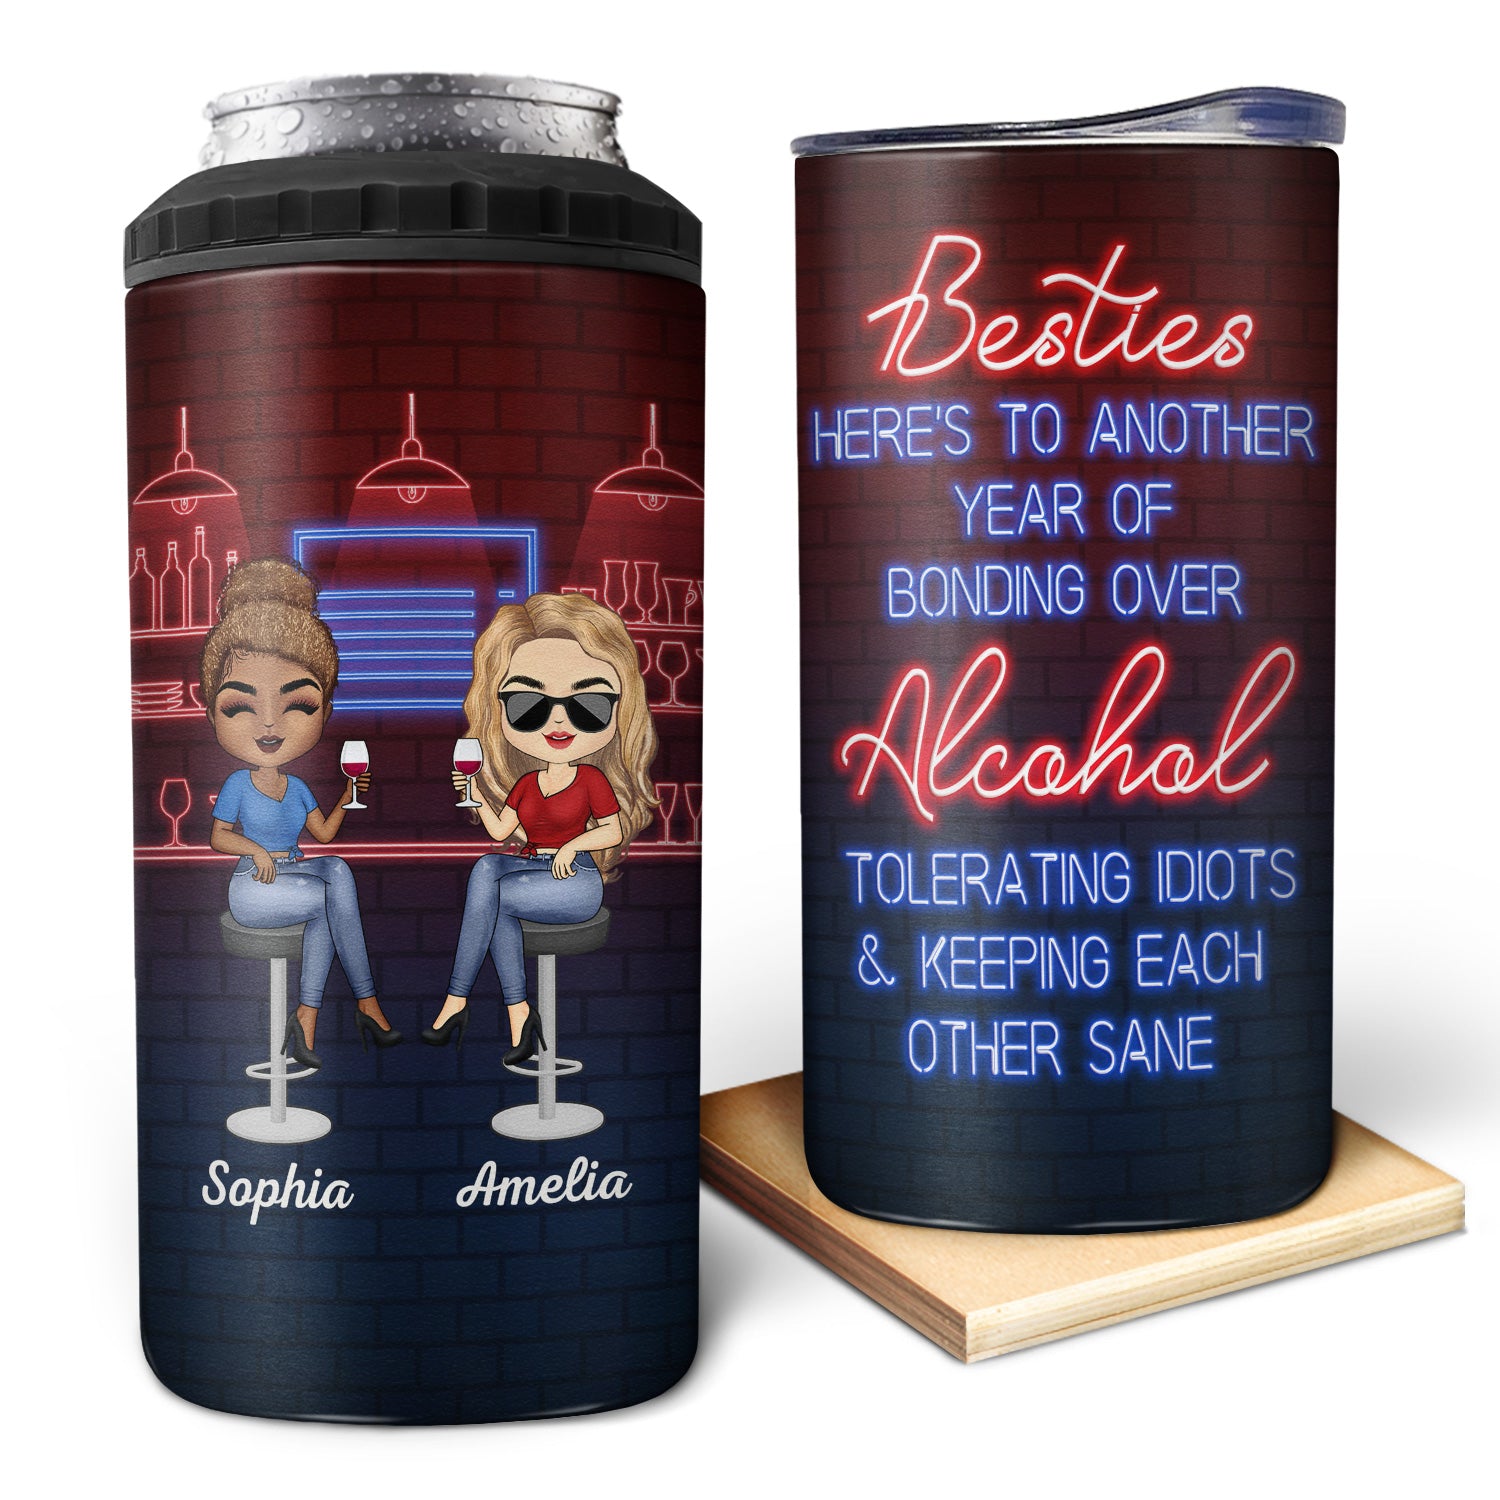 Here's To Another Year Of Bonding Over Alcohol Best Friends - Bestie BFF Gift - Personalized Custom 4 In 1 Can Cooler Tumbler